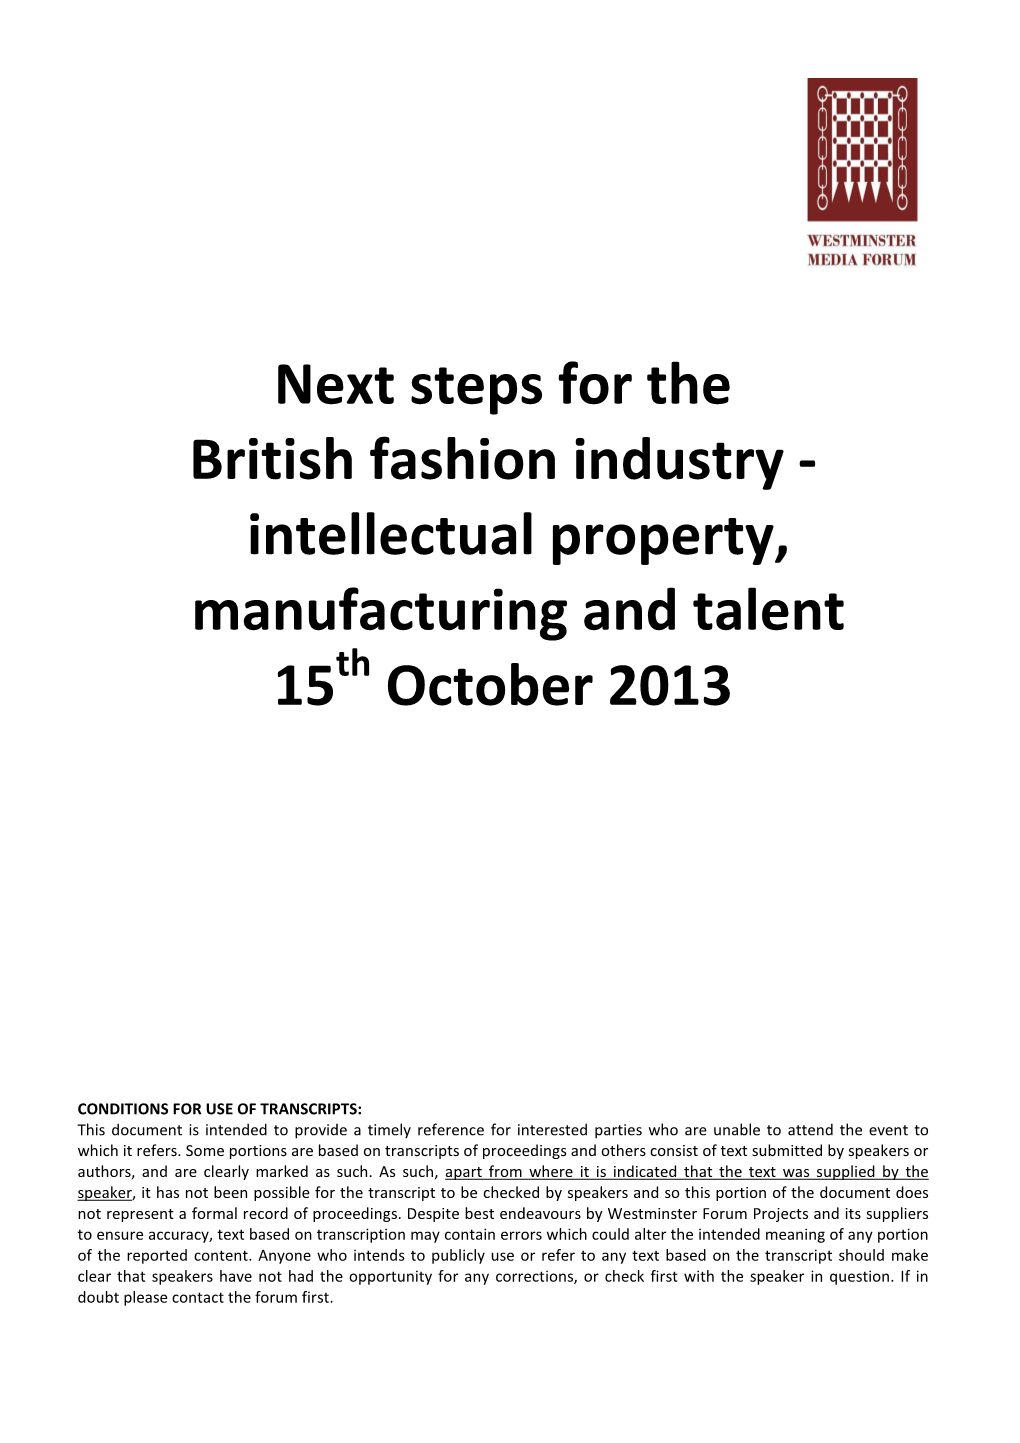 Next Steps for the British Fashion Industry - Intellectual Property, Manufacturing and Talent 15Th October 2013